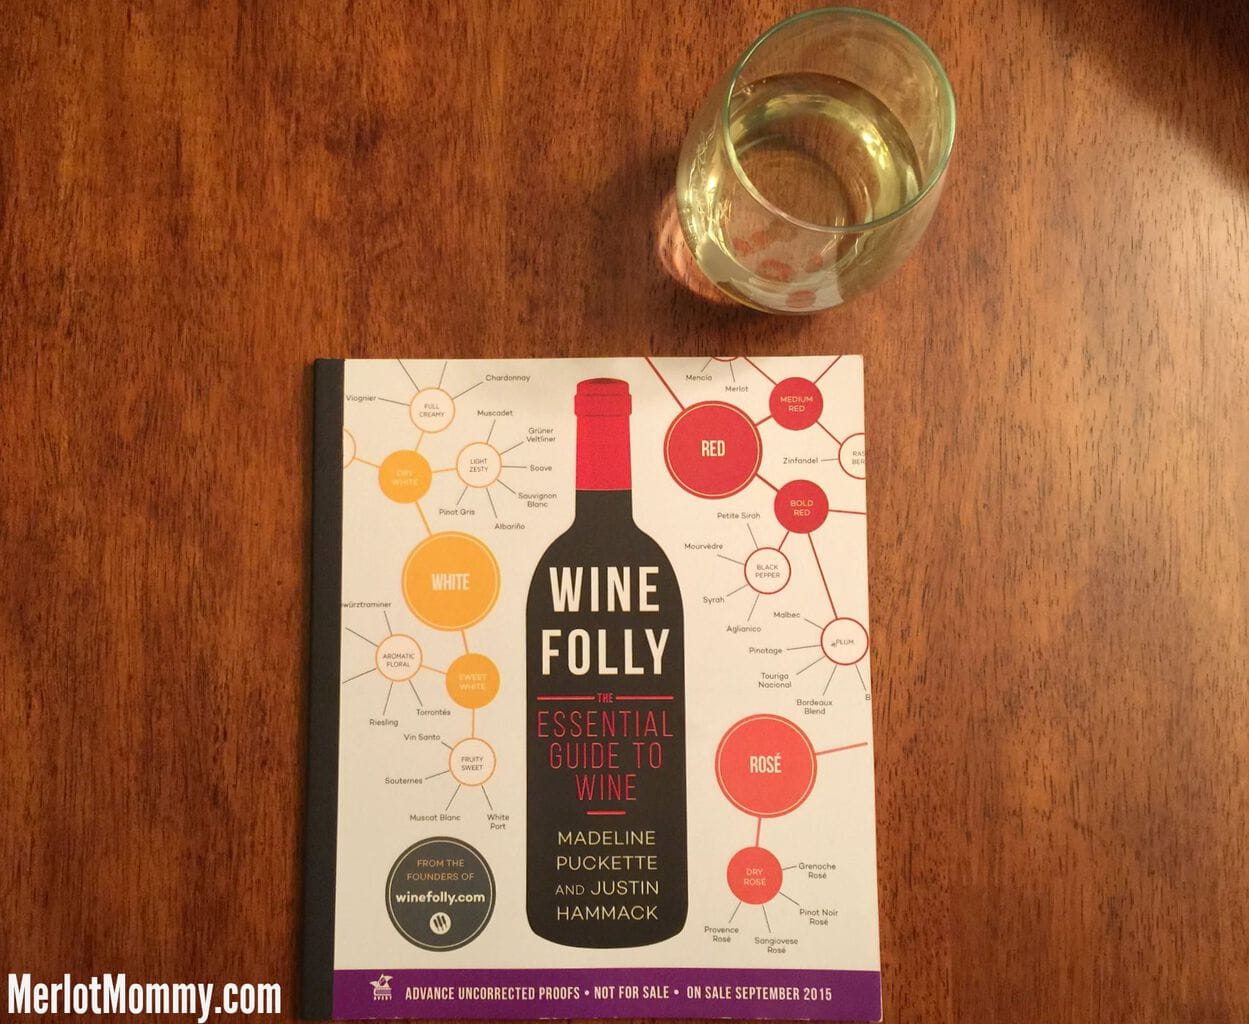 The Only Wine Book You'll Ever Need is Wine Folly: The Essential Guide to Wine